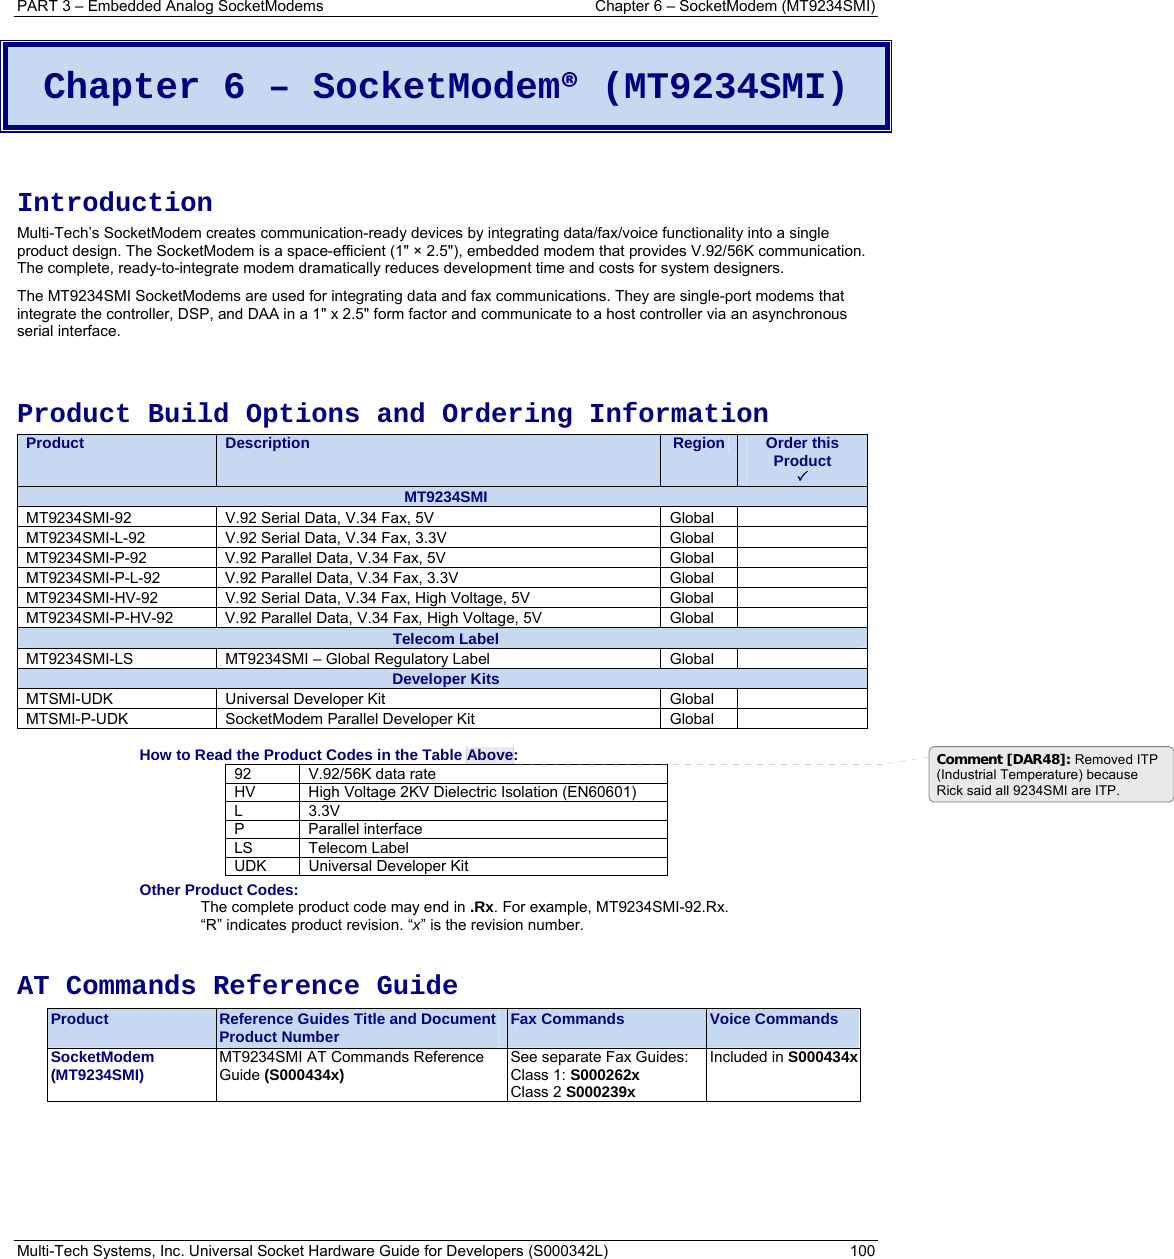 PART 3 – Embedded Analog SocketModems  Chapter 6 – SocketModem (MT9234SMI) Multi-Tech Systems, Inc. Universal Socket Hardware Guide for Developers (S000342L)  100  Chapter 6 – SocketModem® (MT9234SMI)   Introduction Multi-Tech’s SocketModem creates communication-ready devices by integrating data/fax/voice functionality into a single product design. The SocketModem is a space-efficient (1&quot; × 2.5&quot;), embedded modem that provides V.92/56K communication. The complete, ready-to-integrate modem dramatically reduces development time and costs for system designers.  The MT9234SMI SocketModems are used for integrating data and fax communications. They are single-port modems that integrate the controller, DSP, and DAA in a 1&quot; x 2.5&quot; form factor and communicate to a host controller via an asynchronous serial interface.   Product Build Options and Ordering Information Product  Description  Region  Order this Product 3 MT9234SMI MT9234SMI-92  V.92 Serial Data, V.34 Fax, 5V  Global   MT9234SMI-L-92  V.92 Serial Data, V.34 Fax, 3.3V  Global   MT9234SMI-P-92  V.92 Parallel Data, V.34 Fax, 5V  Global   MT9234SMI-P-L-92  V.92 Parallel Data, V.34 Fax, 3.3V  Global   MT9234SMI-HV-92  V.92 Serial Data, V.34 Fax, High Voltage, 5V  Global   MT9234SMI-P-HV-92  V.92 Parallel Data, V.34 Fax, High Voltage, 5V  Global   Telecom Label MT9234SMI-LS  MT9234SMI – Global Regulatory Label  Global   Developer Kits MTSMI-UDK Universal Developer Kit  Global  MTSMI-P-UDK  SocketModem Parallel Developer Kit  Global    How to Read the Product Codes in the Table Above: 92  V.92/56K data rate HV  High Voltage 2KV Dielectric Isolation (EN60601) L   3.3V P Parallel interface LS Telecom Label UDK  Universal Developer Kit Other Product Codes: The complete product code may end in .Rx. For example, MT9234SMI-92.Rx.   “R” indicates product revision. “x” is the revision number.  AT Commands Reference Guide Product  Reference Guides Title and Document Product Number  Fax Commands  Voice Commands SocketModem (MT9234SMI)  MT9234SMI AT Commands Reference Guide (S000434x)  See separate Fax Guides: Class 1: S000262x Class 2 S000239x Included in S000434x Comment [DAR48]: Removed ITP (Industrial Temperature) because Rick said all 9234SMI are ITP. 